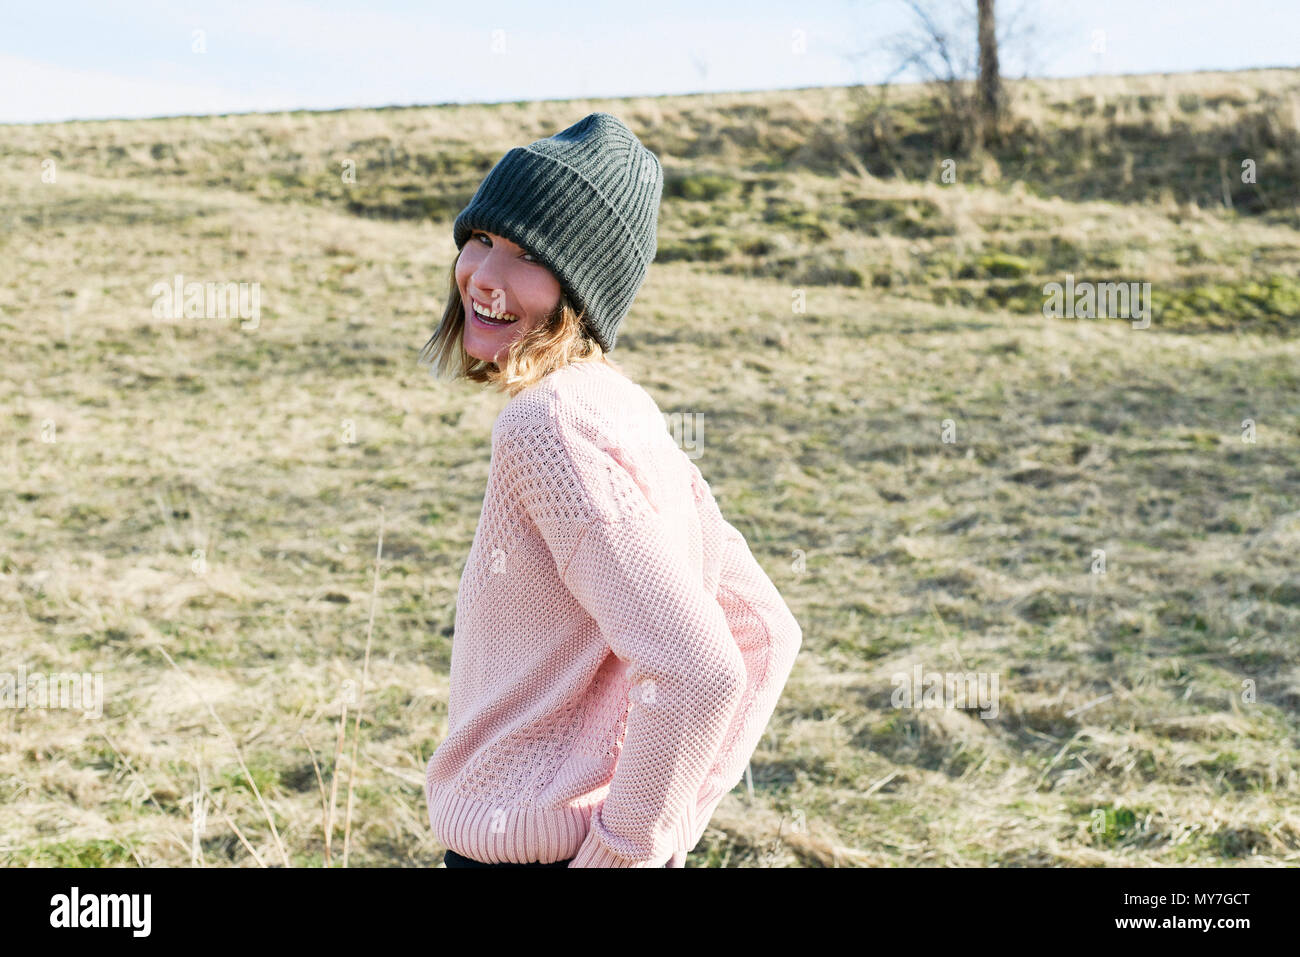 Portrait of mid adult woman wearing knitted hat in field Stock Photo